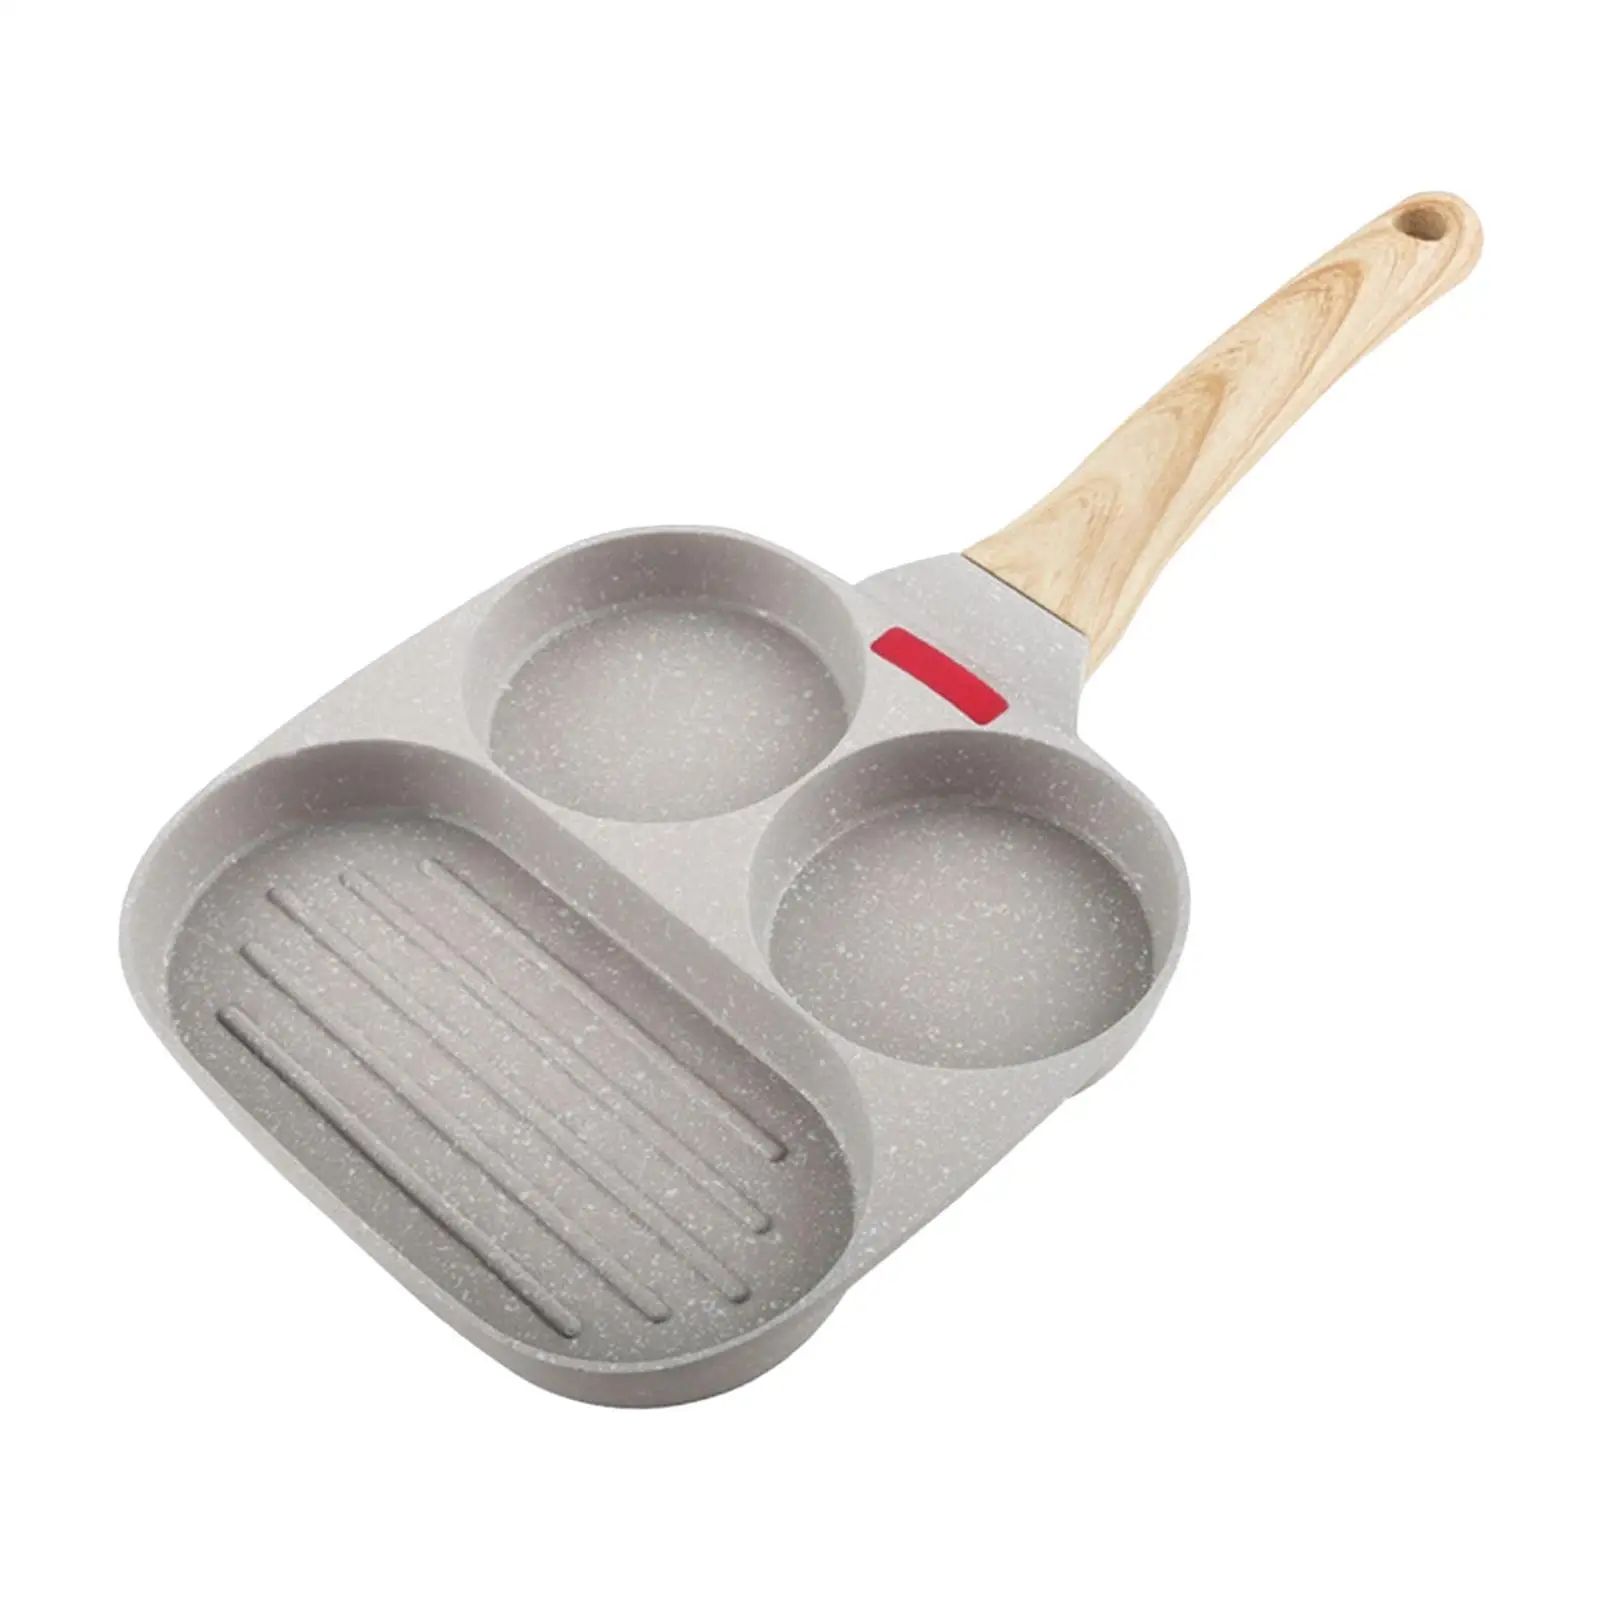 Nonstick Egg Frying pans easy Clean Cooking Pan for Breakfast Camping Sausage